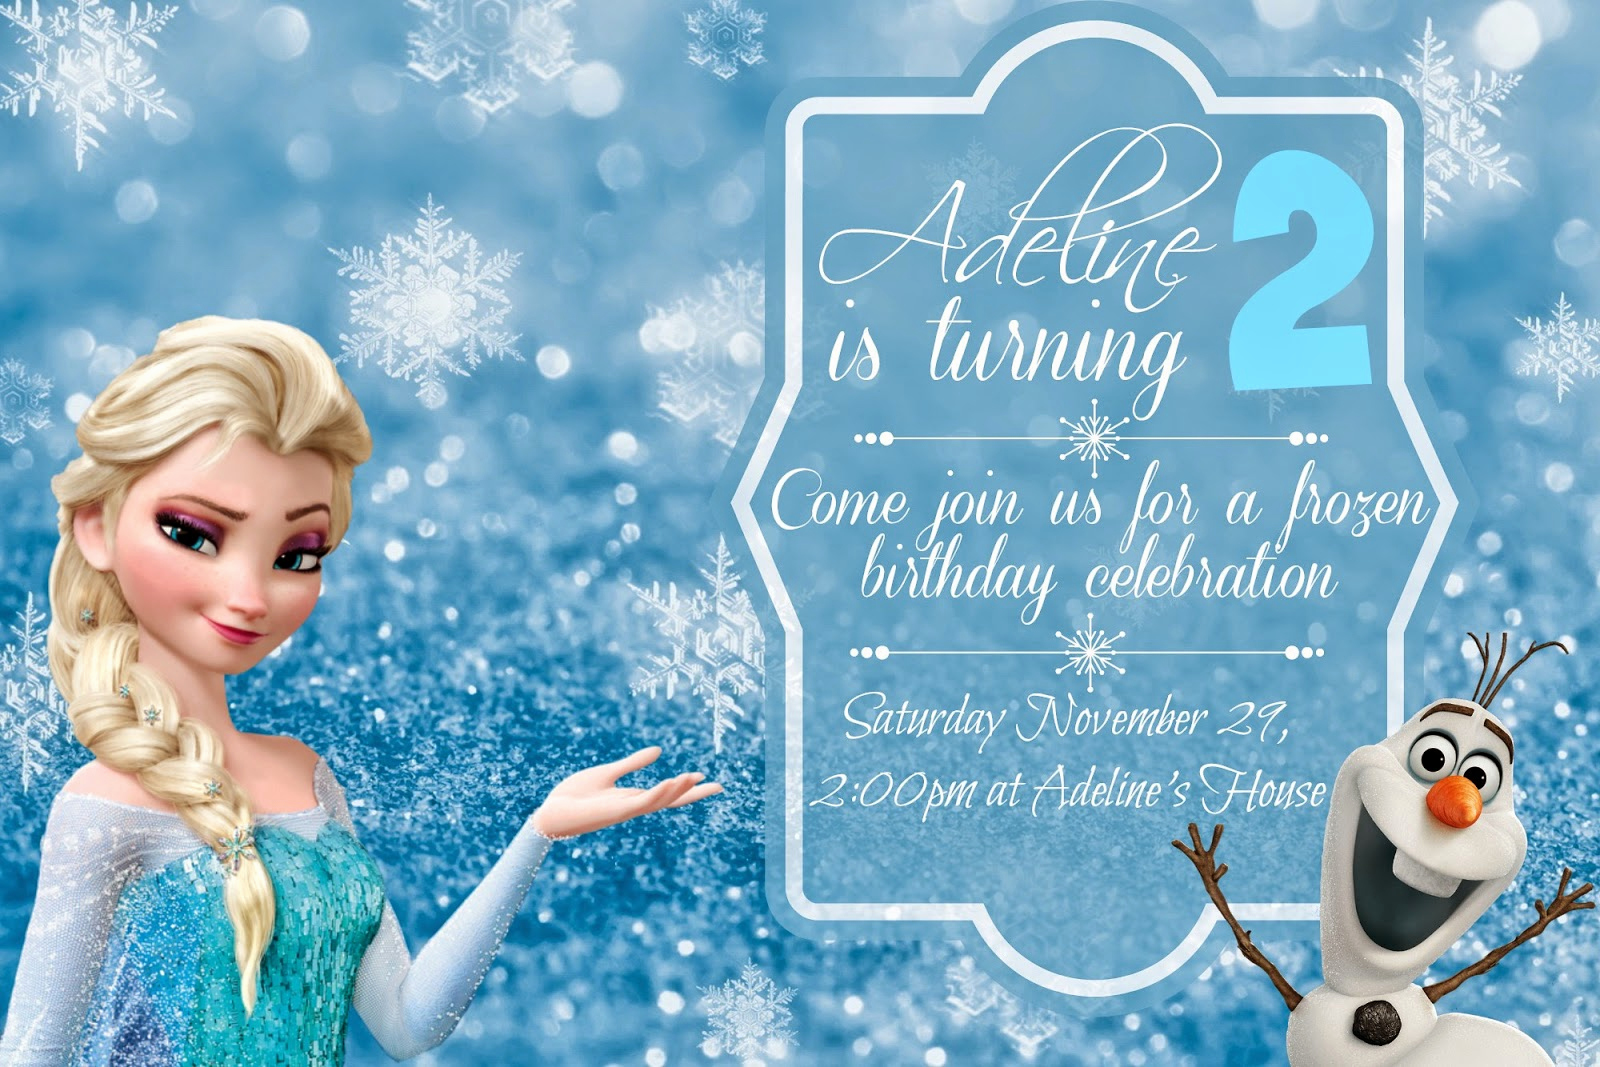 Frozen Birthday Invitation Templates Best Of orchard Girls Free Frozen Birthday Party Invitations and